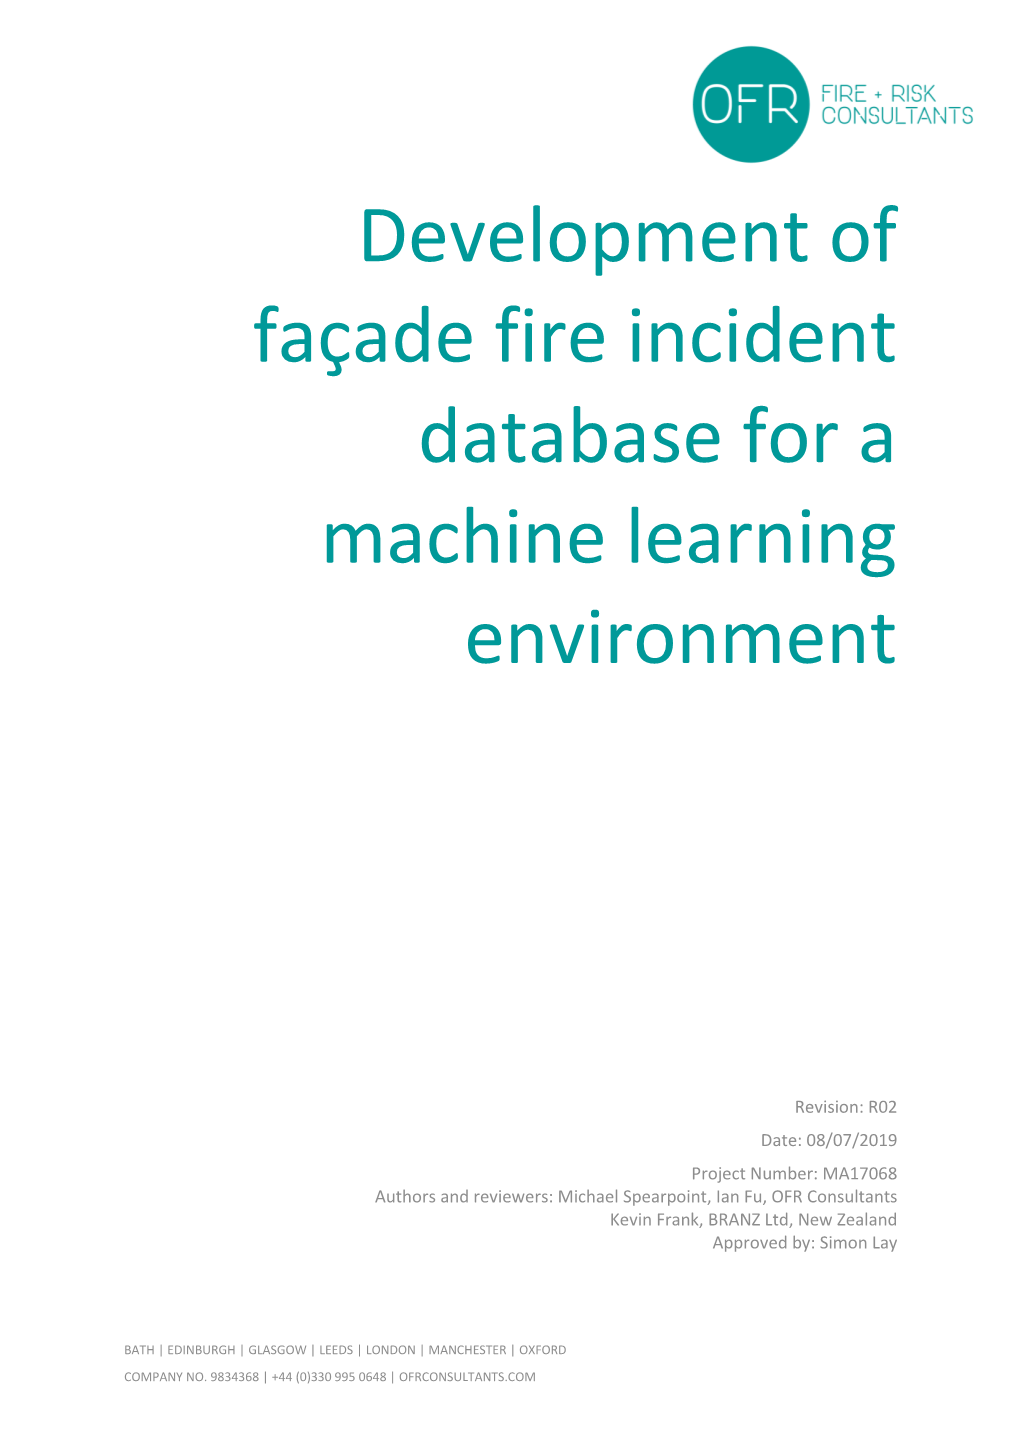 Development of Façade Fire Incident Database for a Machine Learning Environment